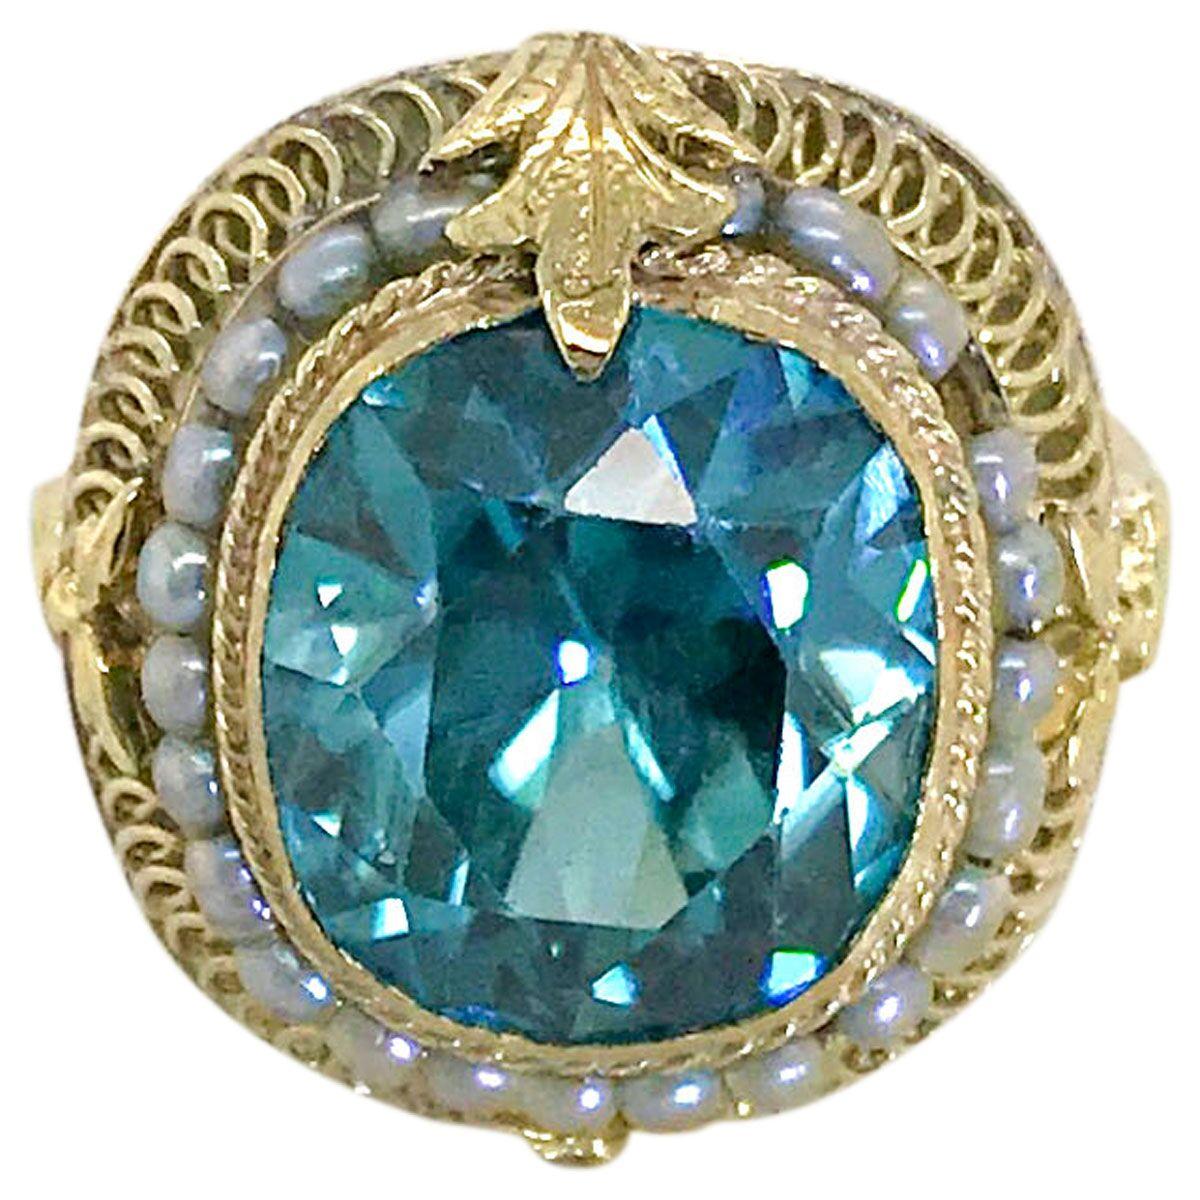 Blue zircons are the most amazing gemstone, if you don't know much about them you are missing out on something special. Many people get Zircons and Cubic Zirconia confused. As we know Cubic Zirconia is a man made diamond simulant, however Zircon is